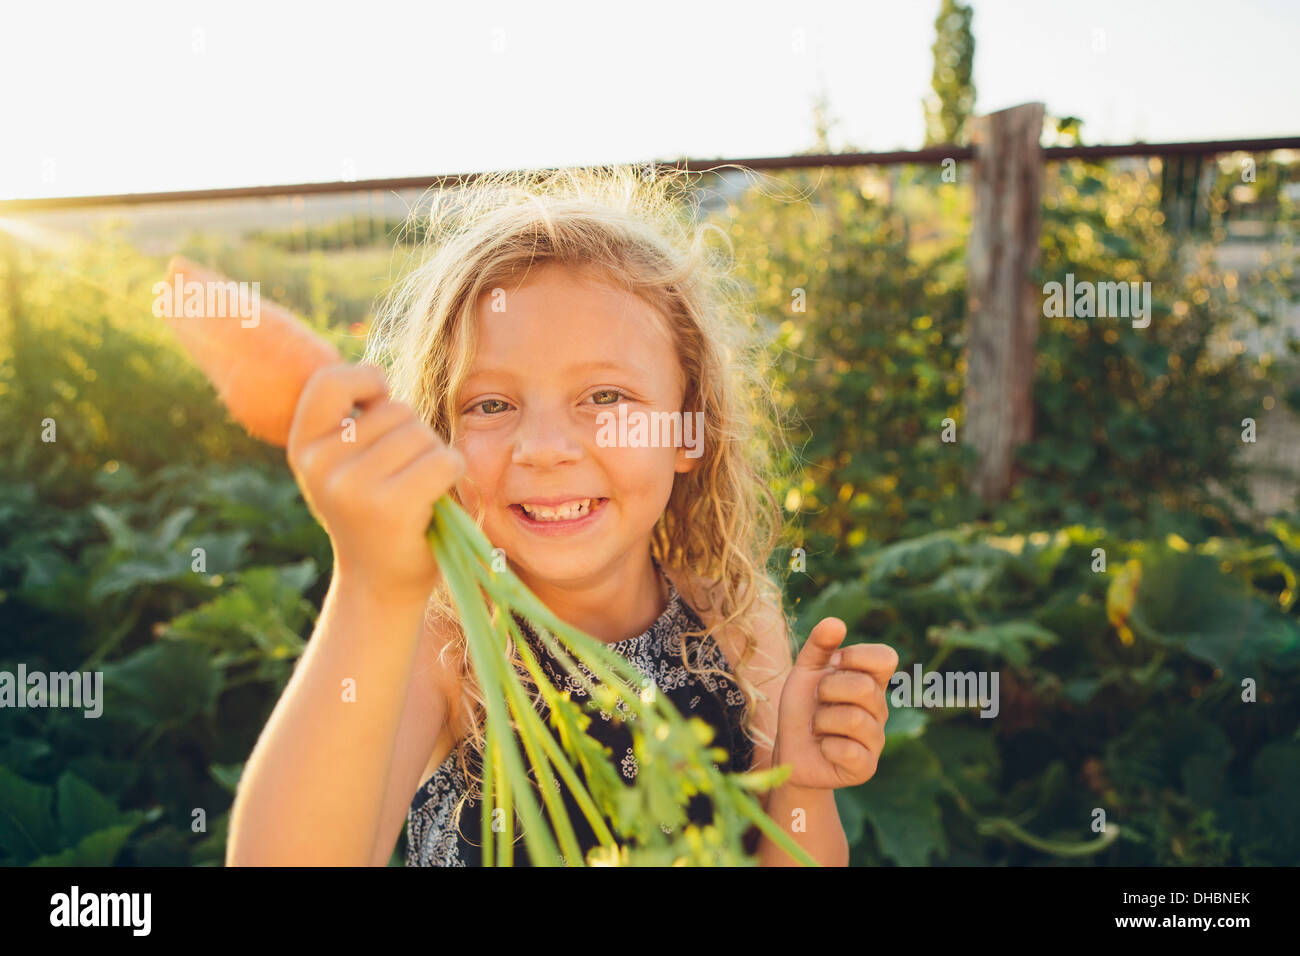 A young girl with long red curly hair outdoors in a garden holding a large fresh picked carrot. Stock Photo